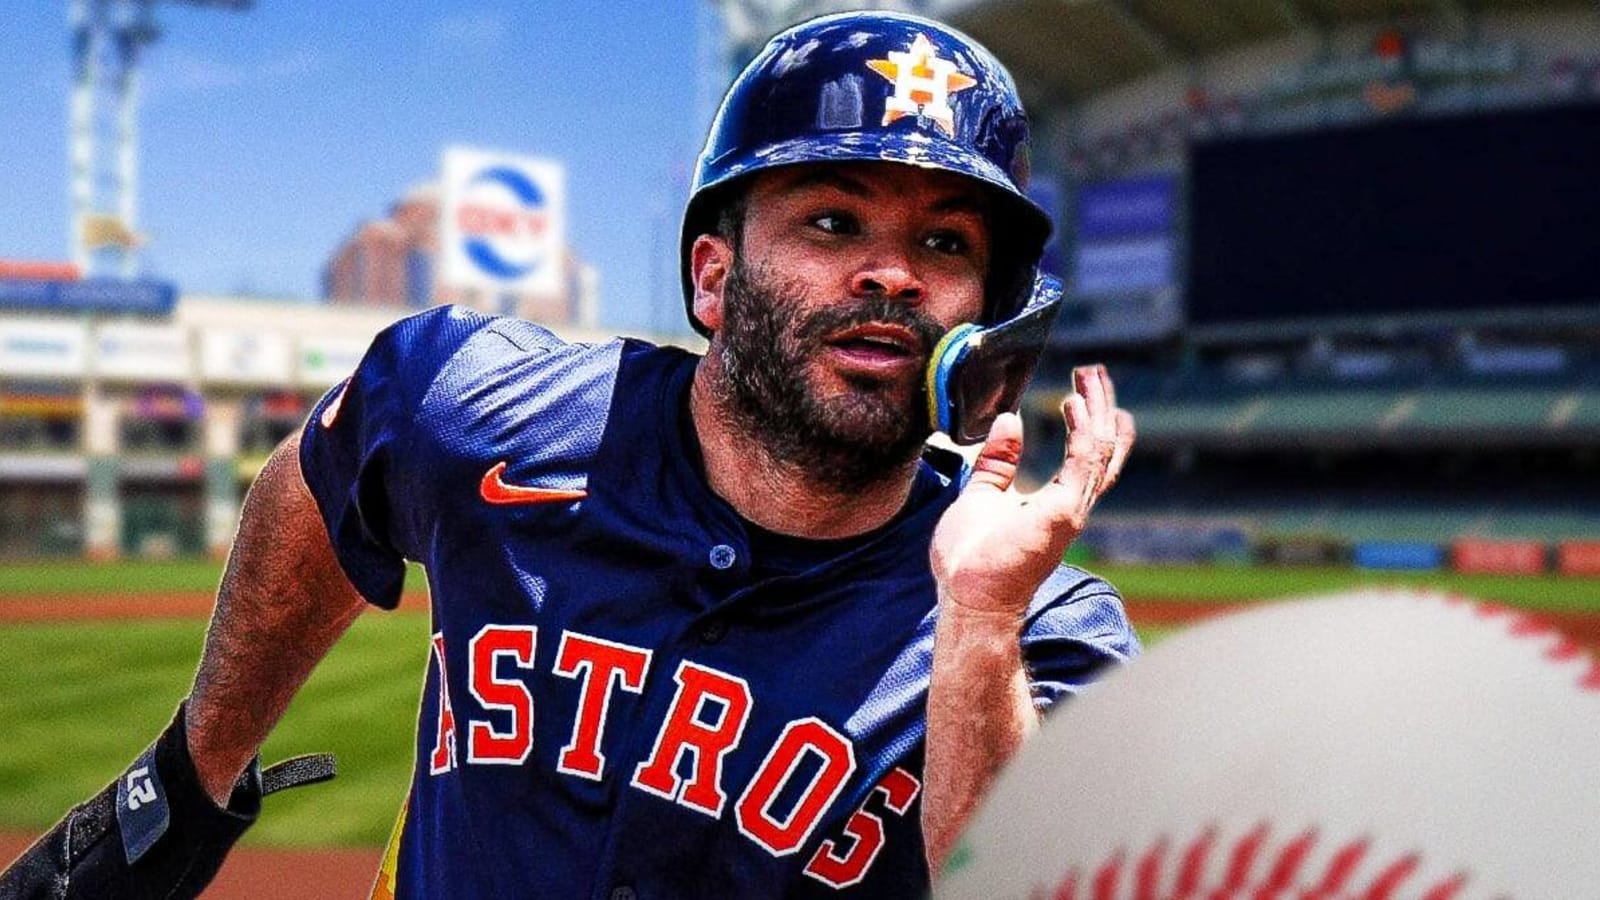 Astros: The awesome story about how Jose Altuve nearly became a forgotten Houston prospect